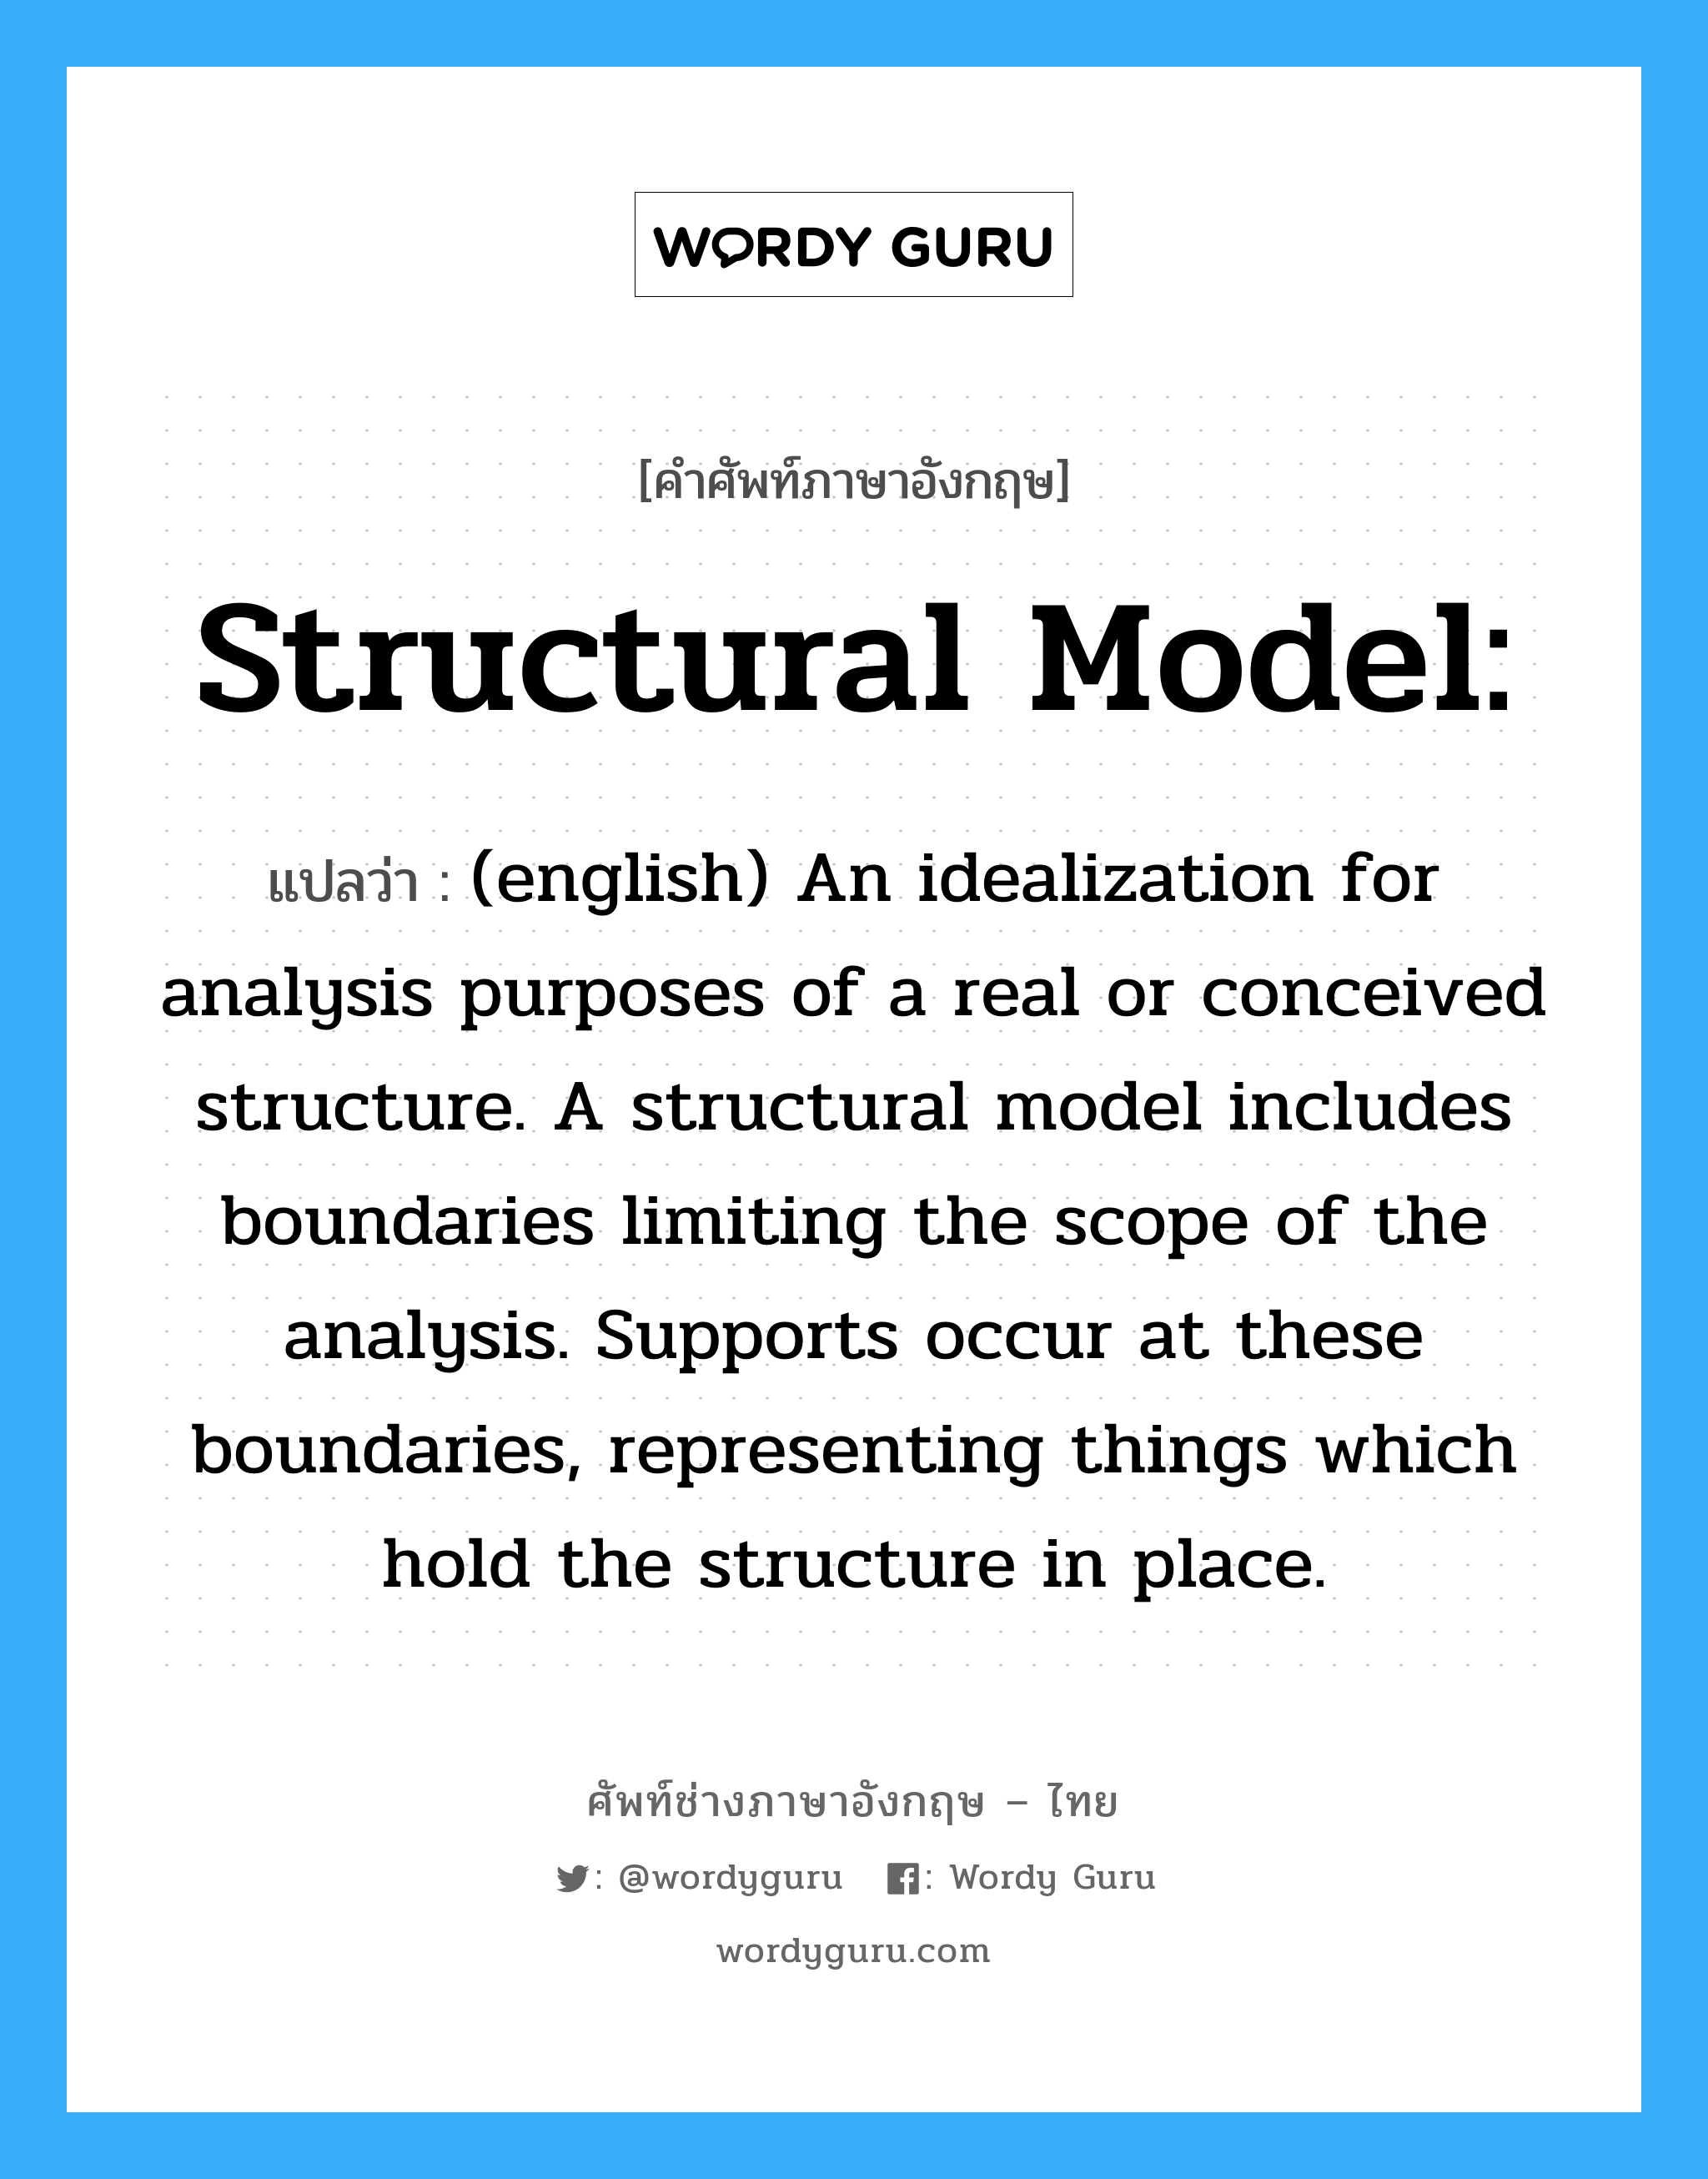 (english) An idealization for analysis purposes of a real or conceived structure. A structural model includes boundaries limiting the scope of the analysis. Supports occur at these boundaries, representing things which hold the structure in place. ภาษาอังกฤษ?, คำศัพท์ช่างภาษาอังกฤษ - ไทย (english) An idealization for analysis purposes of a real or conceived structure. A structural model includes boundaries limiting the scope of the analysis. Supports occur at these boundaries, representing things which hold the structure in place. คำศัพท์ภาษาอังกฤษ (english) An idealization for analysis purposes of a real or conceived structure. A structural model includes boundaries limiting the scope of the analysis. Supports occur at these boundaries, representing things which hold the structure in place. แปลว่า Structural model: